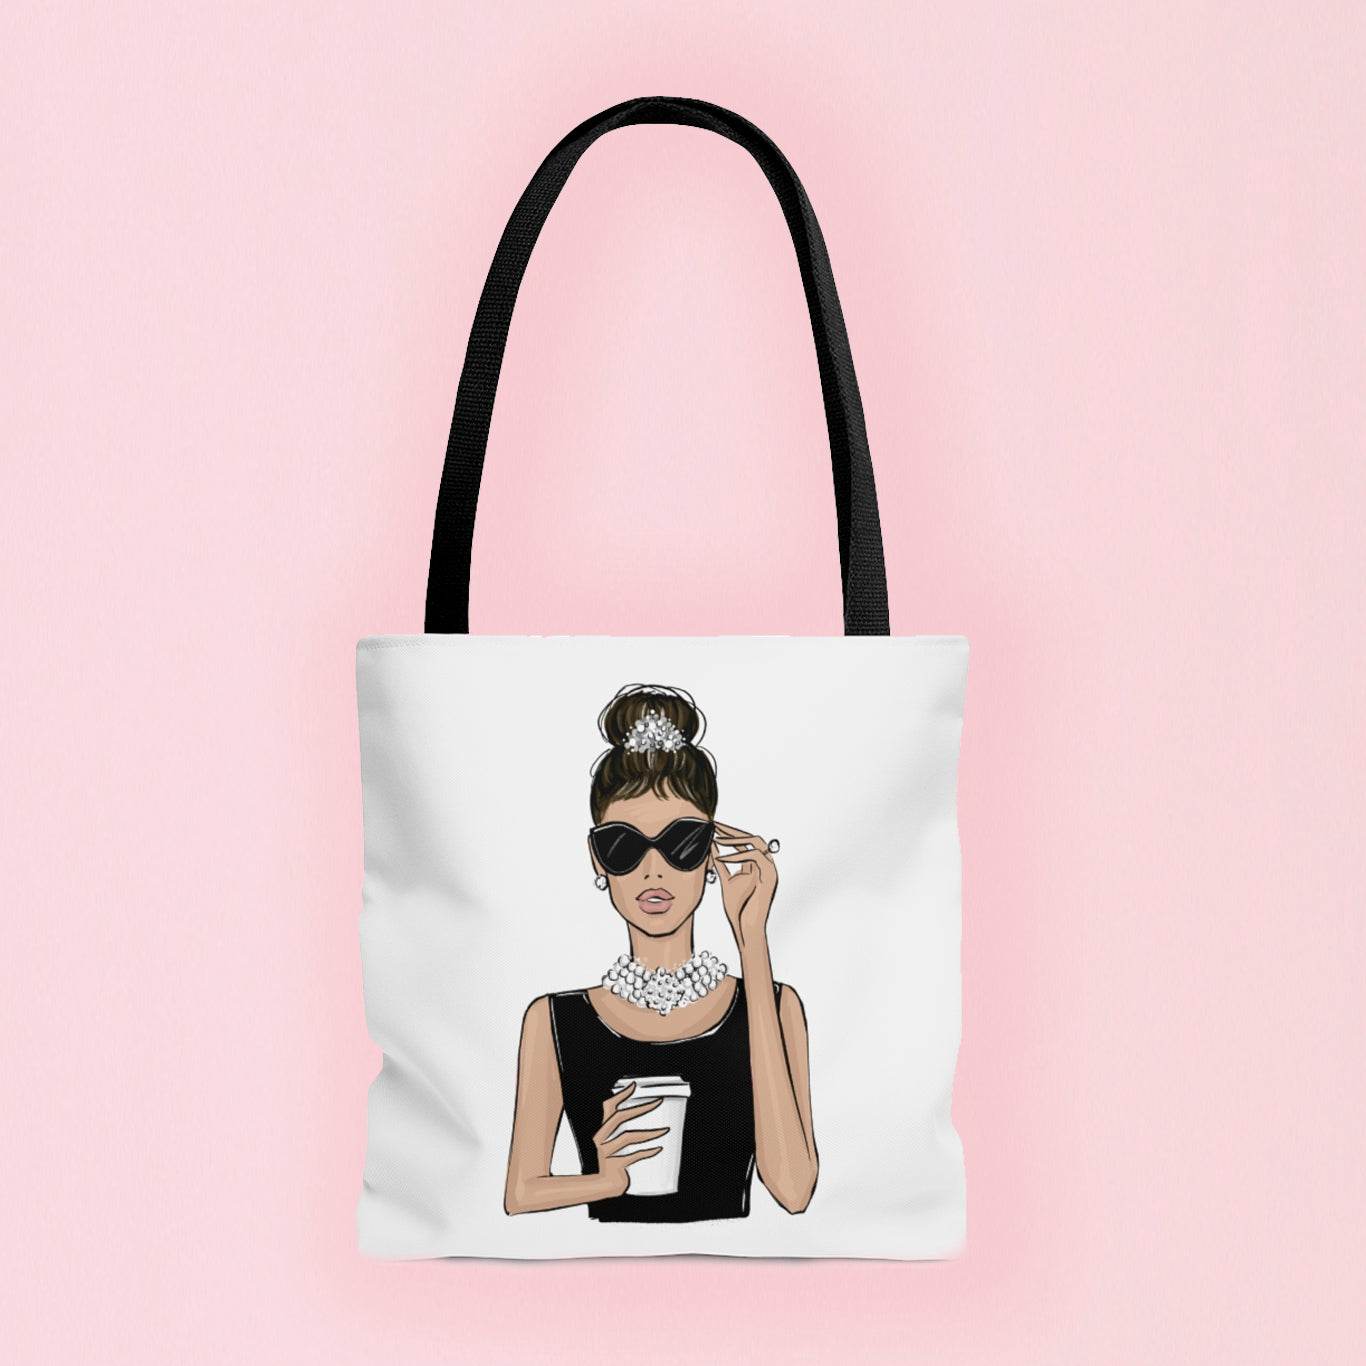 Buy Crazyify Basic Design Tote Bag, Tote Bag for Women & Girls, Canvas  Printed Tote Bag, Grocery Bag/Shopping Bag, Stylish Tote Bags